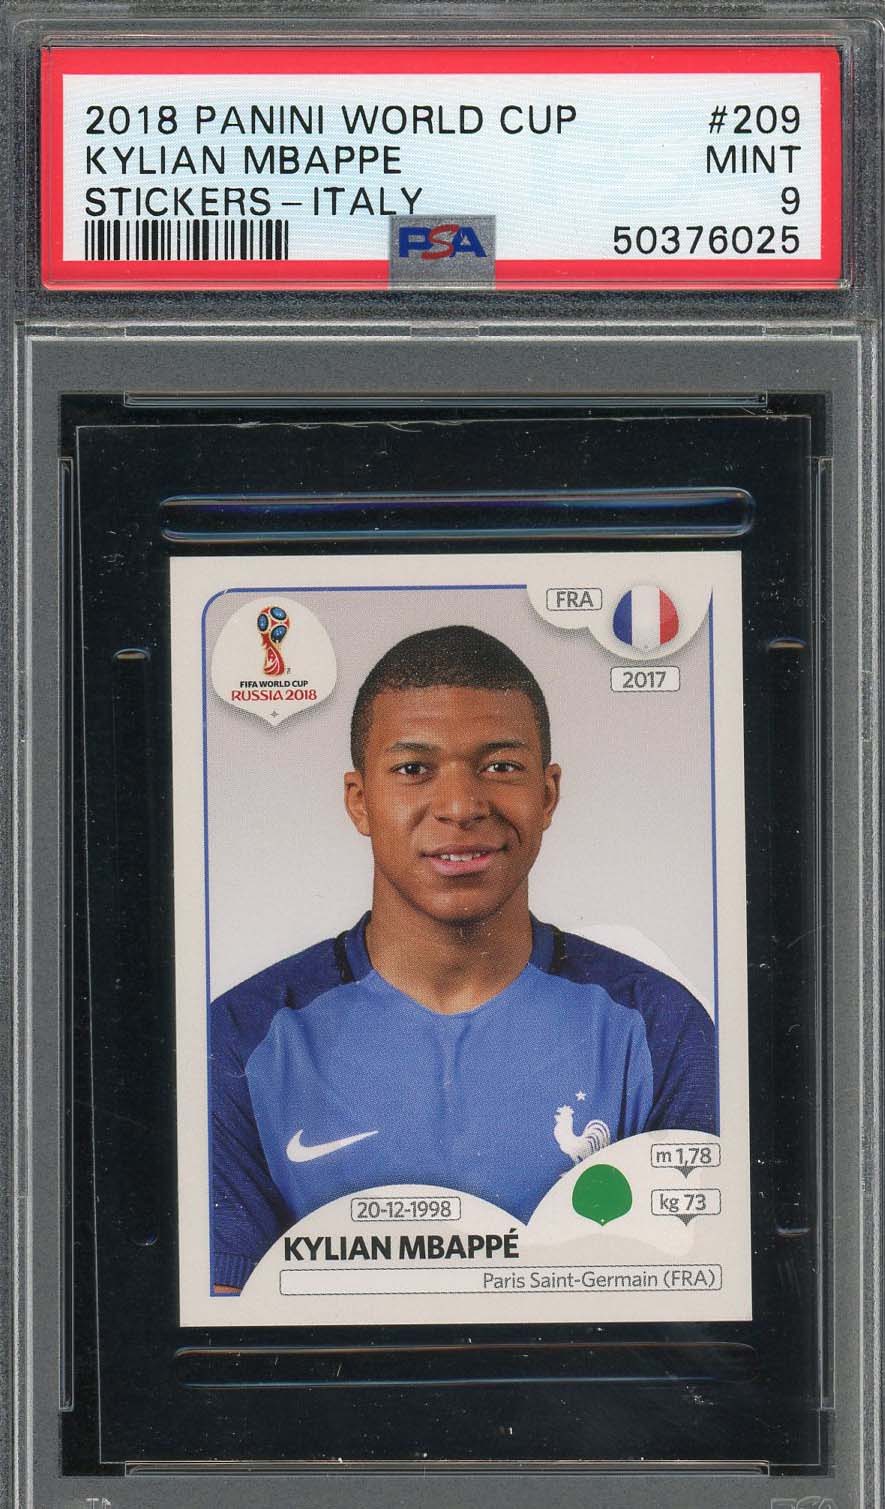 Kylian Mbappe 2018 Panini World Cup Rookie Stickers Italy Card #209 PS